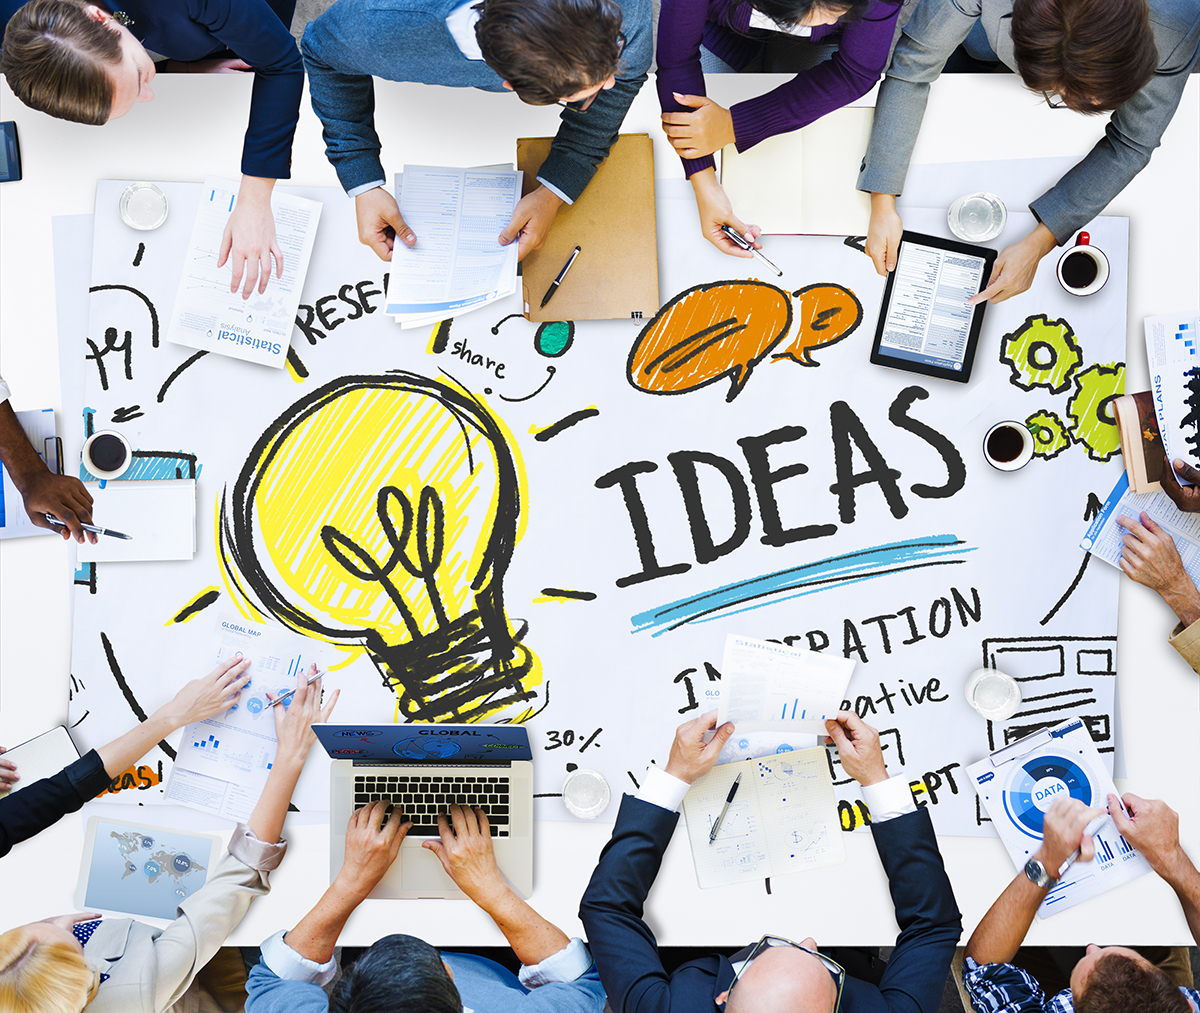 6 Steps to Creating a Culture of Innovation - Jeff DeGraff